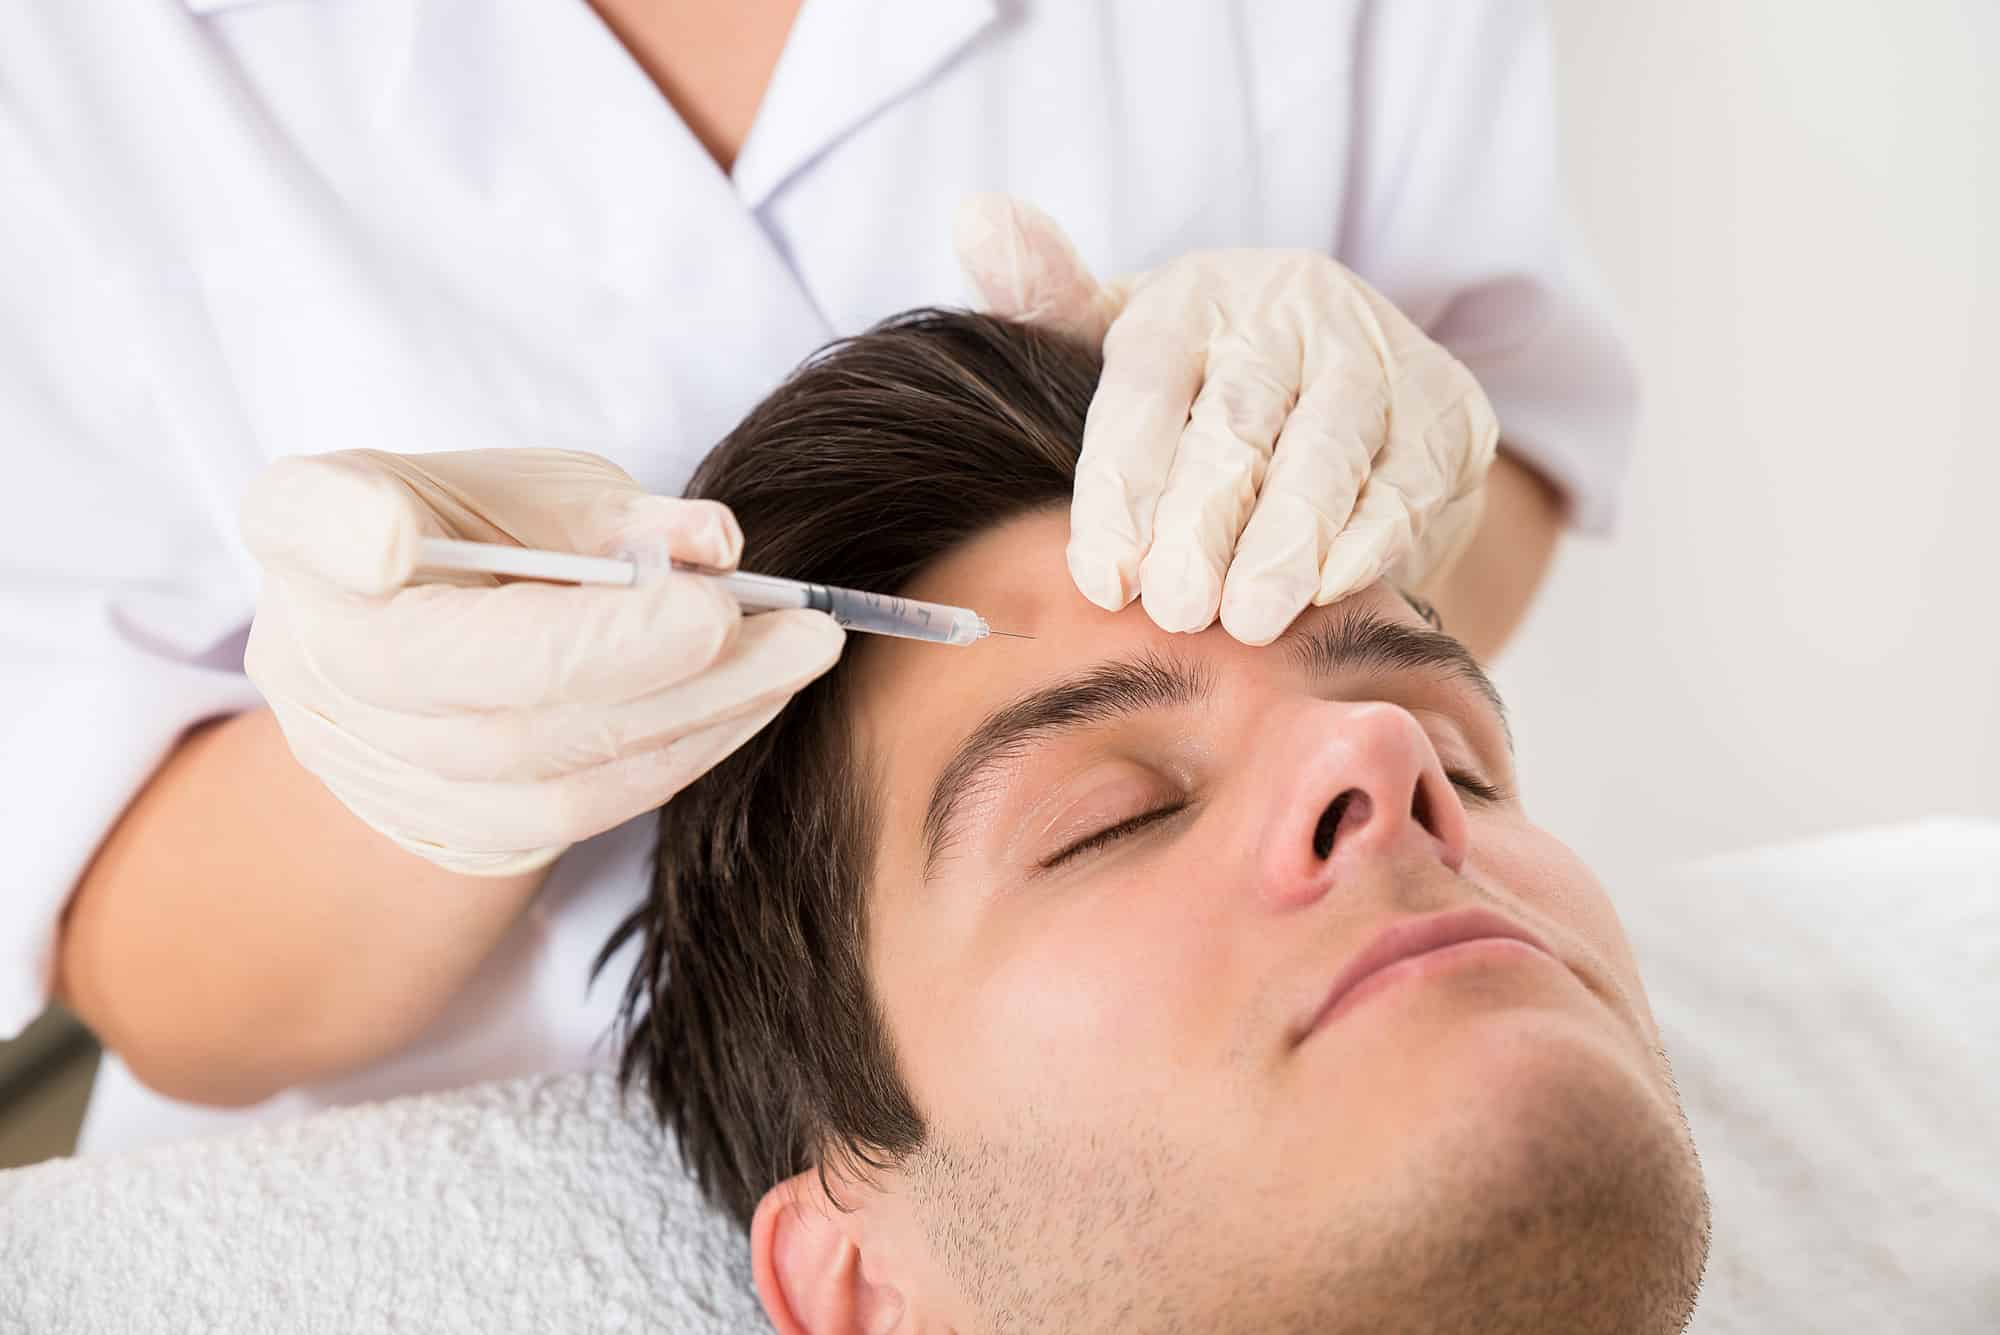 Botox For Men Pros And Cons To Consider Before Getting One